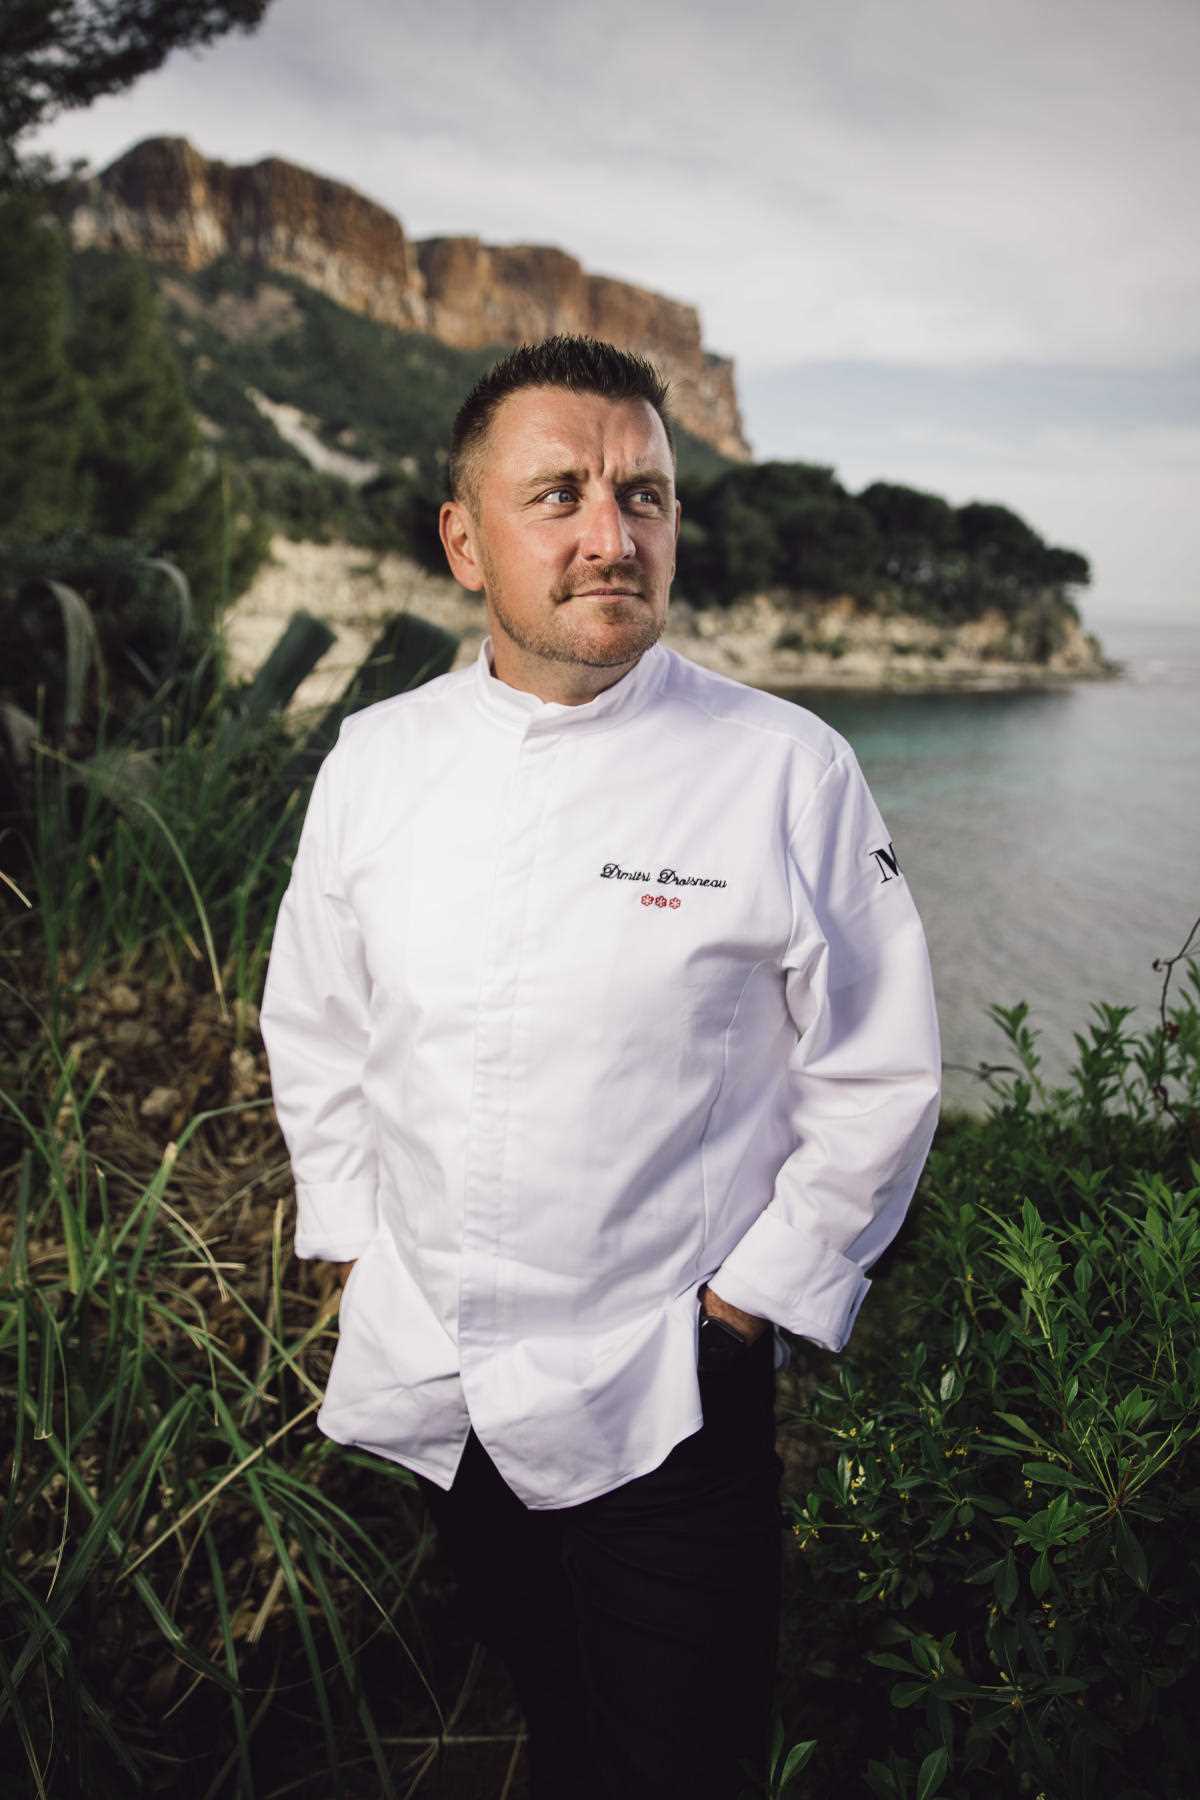 Like another inspiring hat, Cap Canaille is worn by Dimitri Droisneau, the chef of La Villa Madie in Cassis.